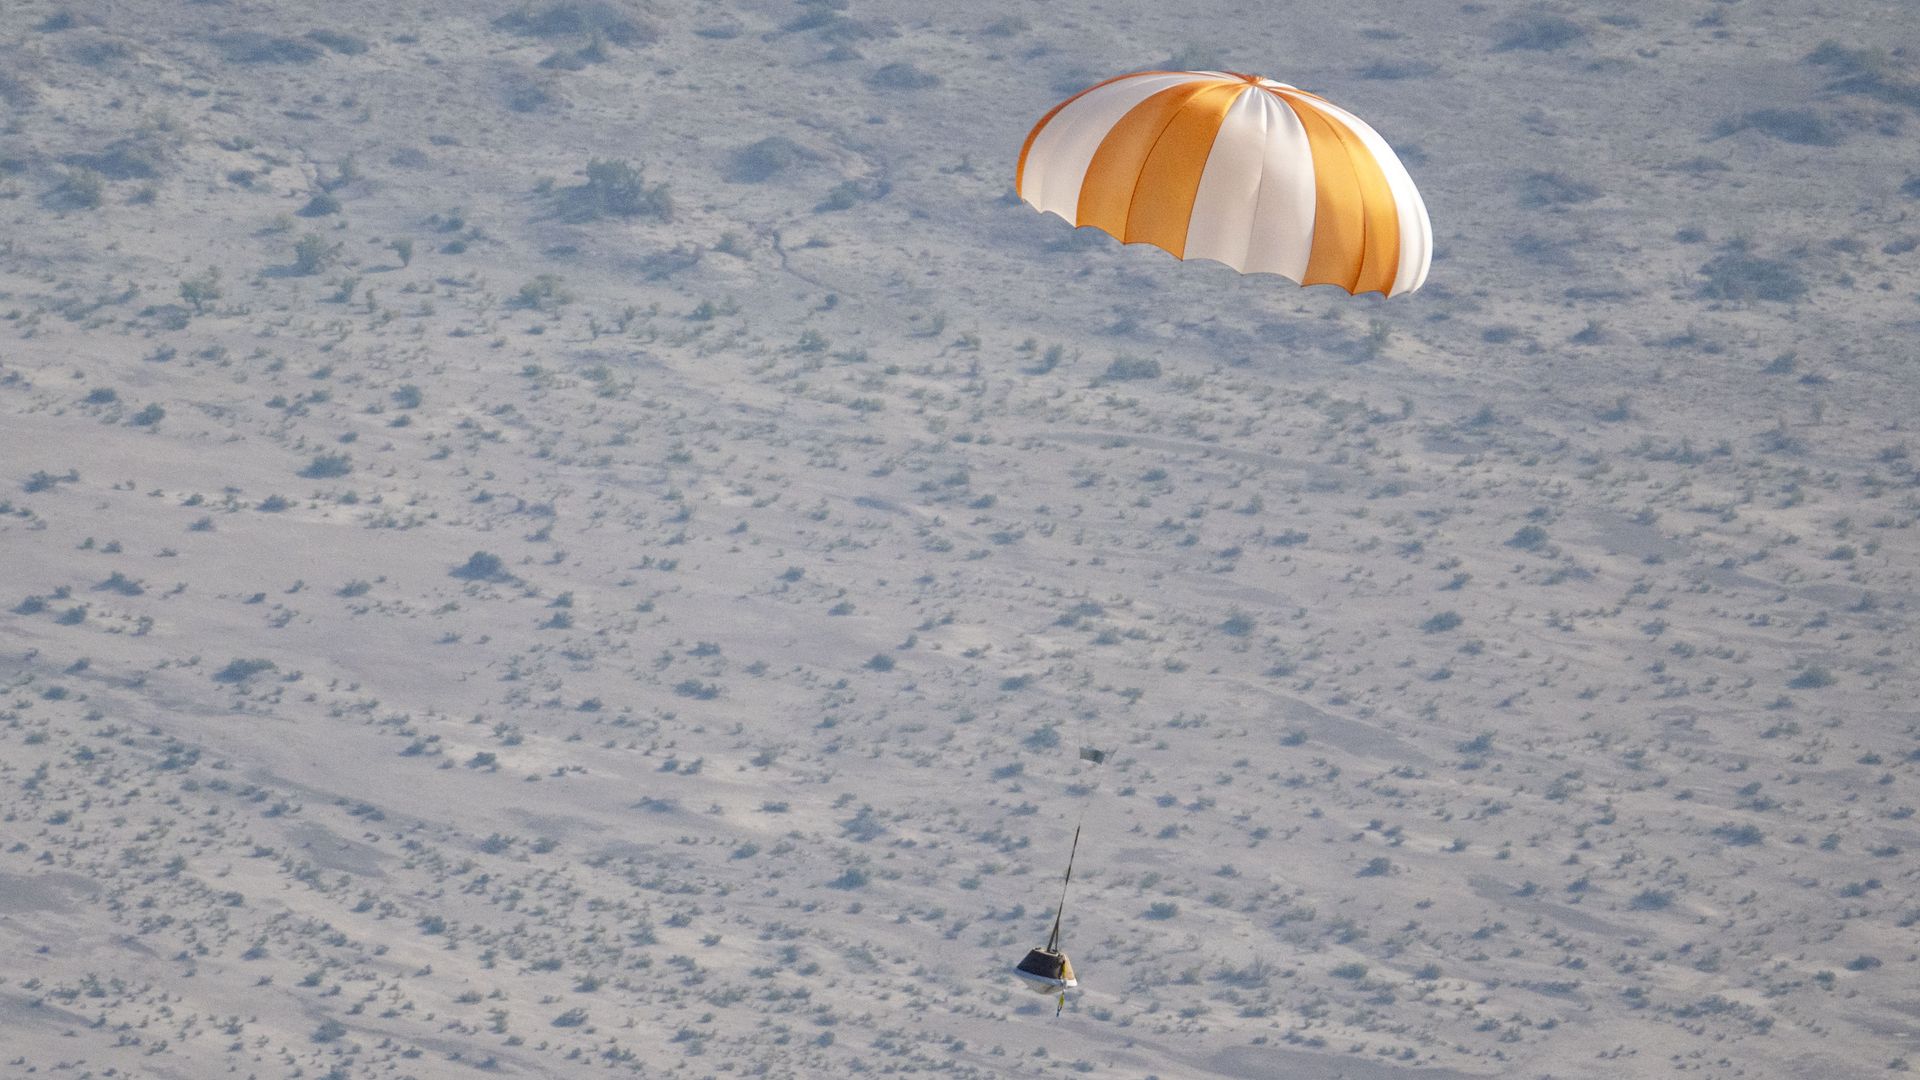 A training capsule under an orange and white parachute descends to the desert.